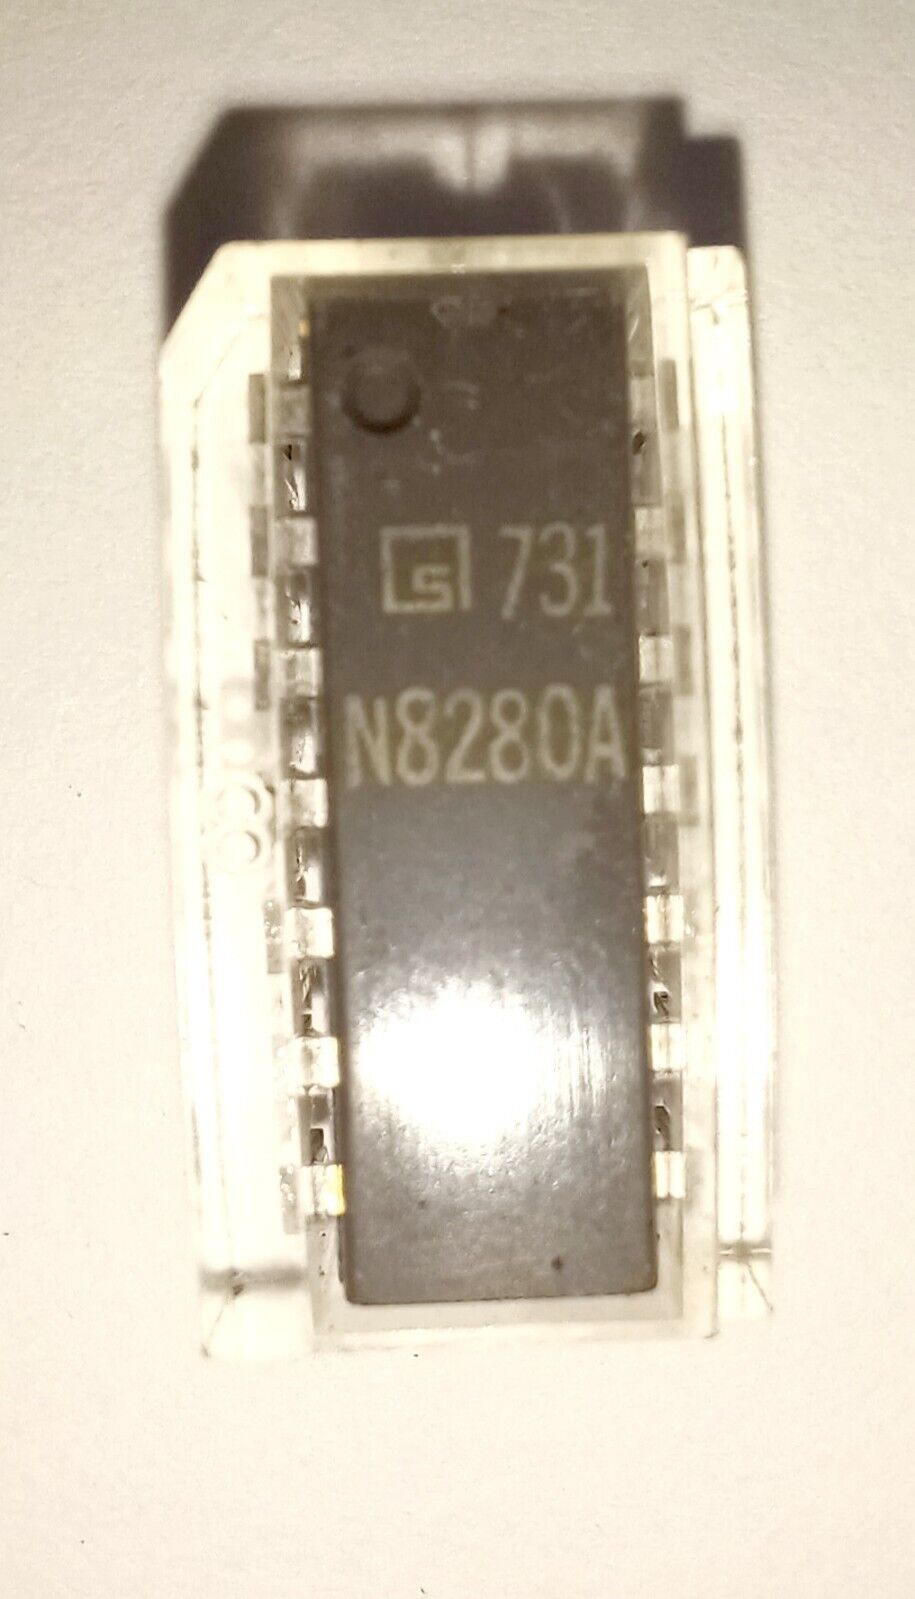 SIGNETICS N8280A IC chip microchip DIP-14 vintage 1973    DECADE asynchronous 